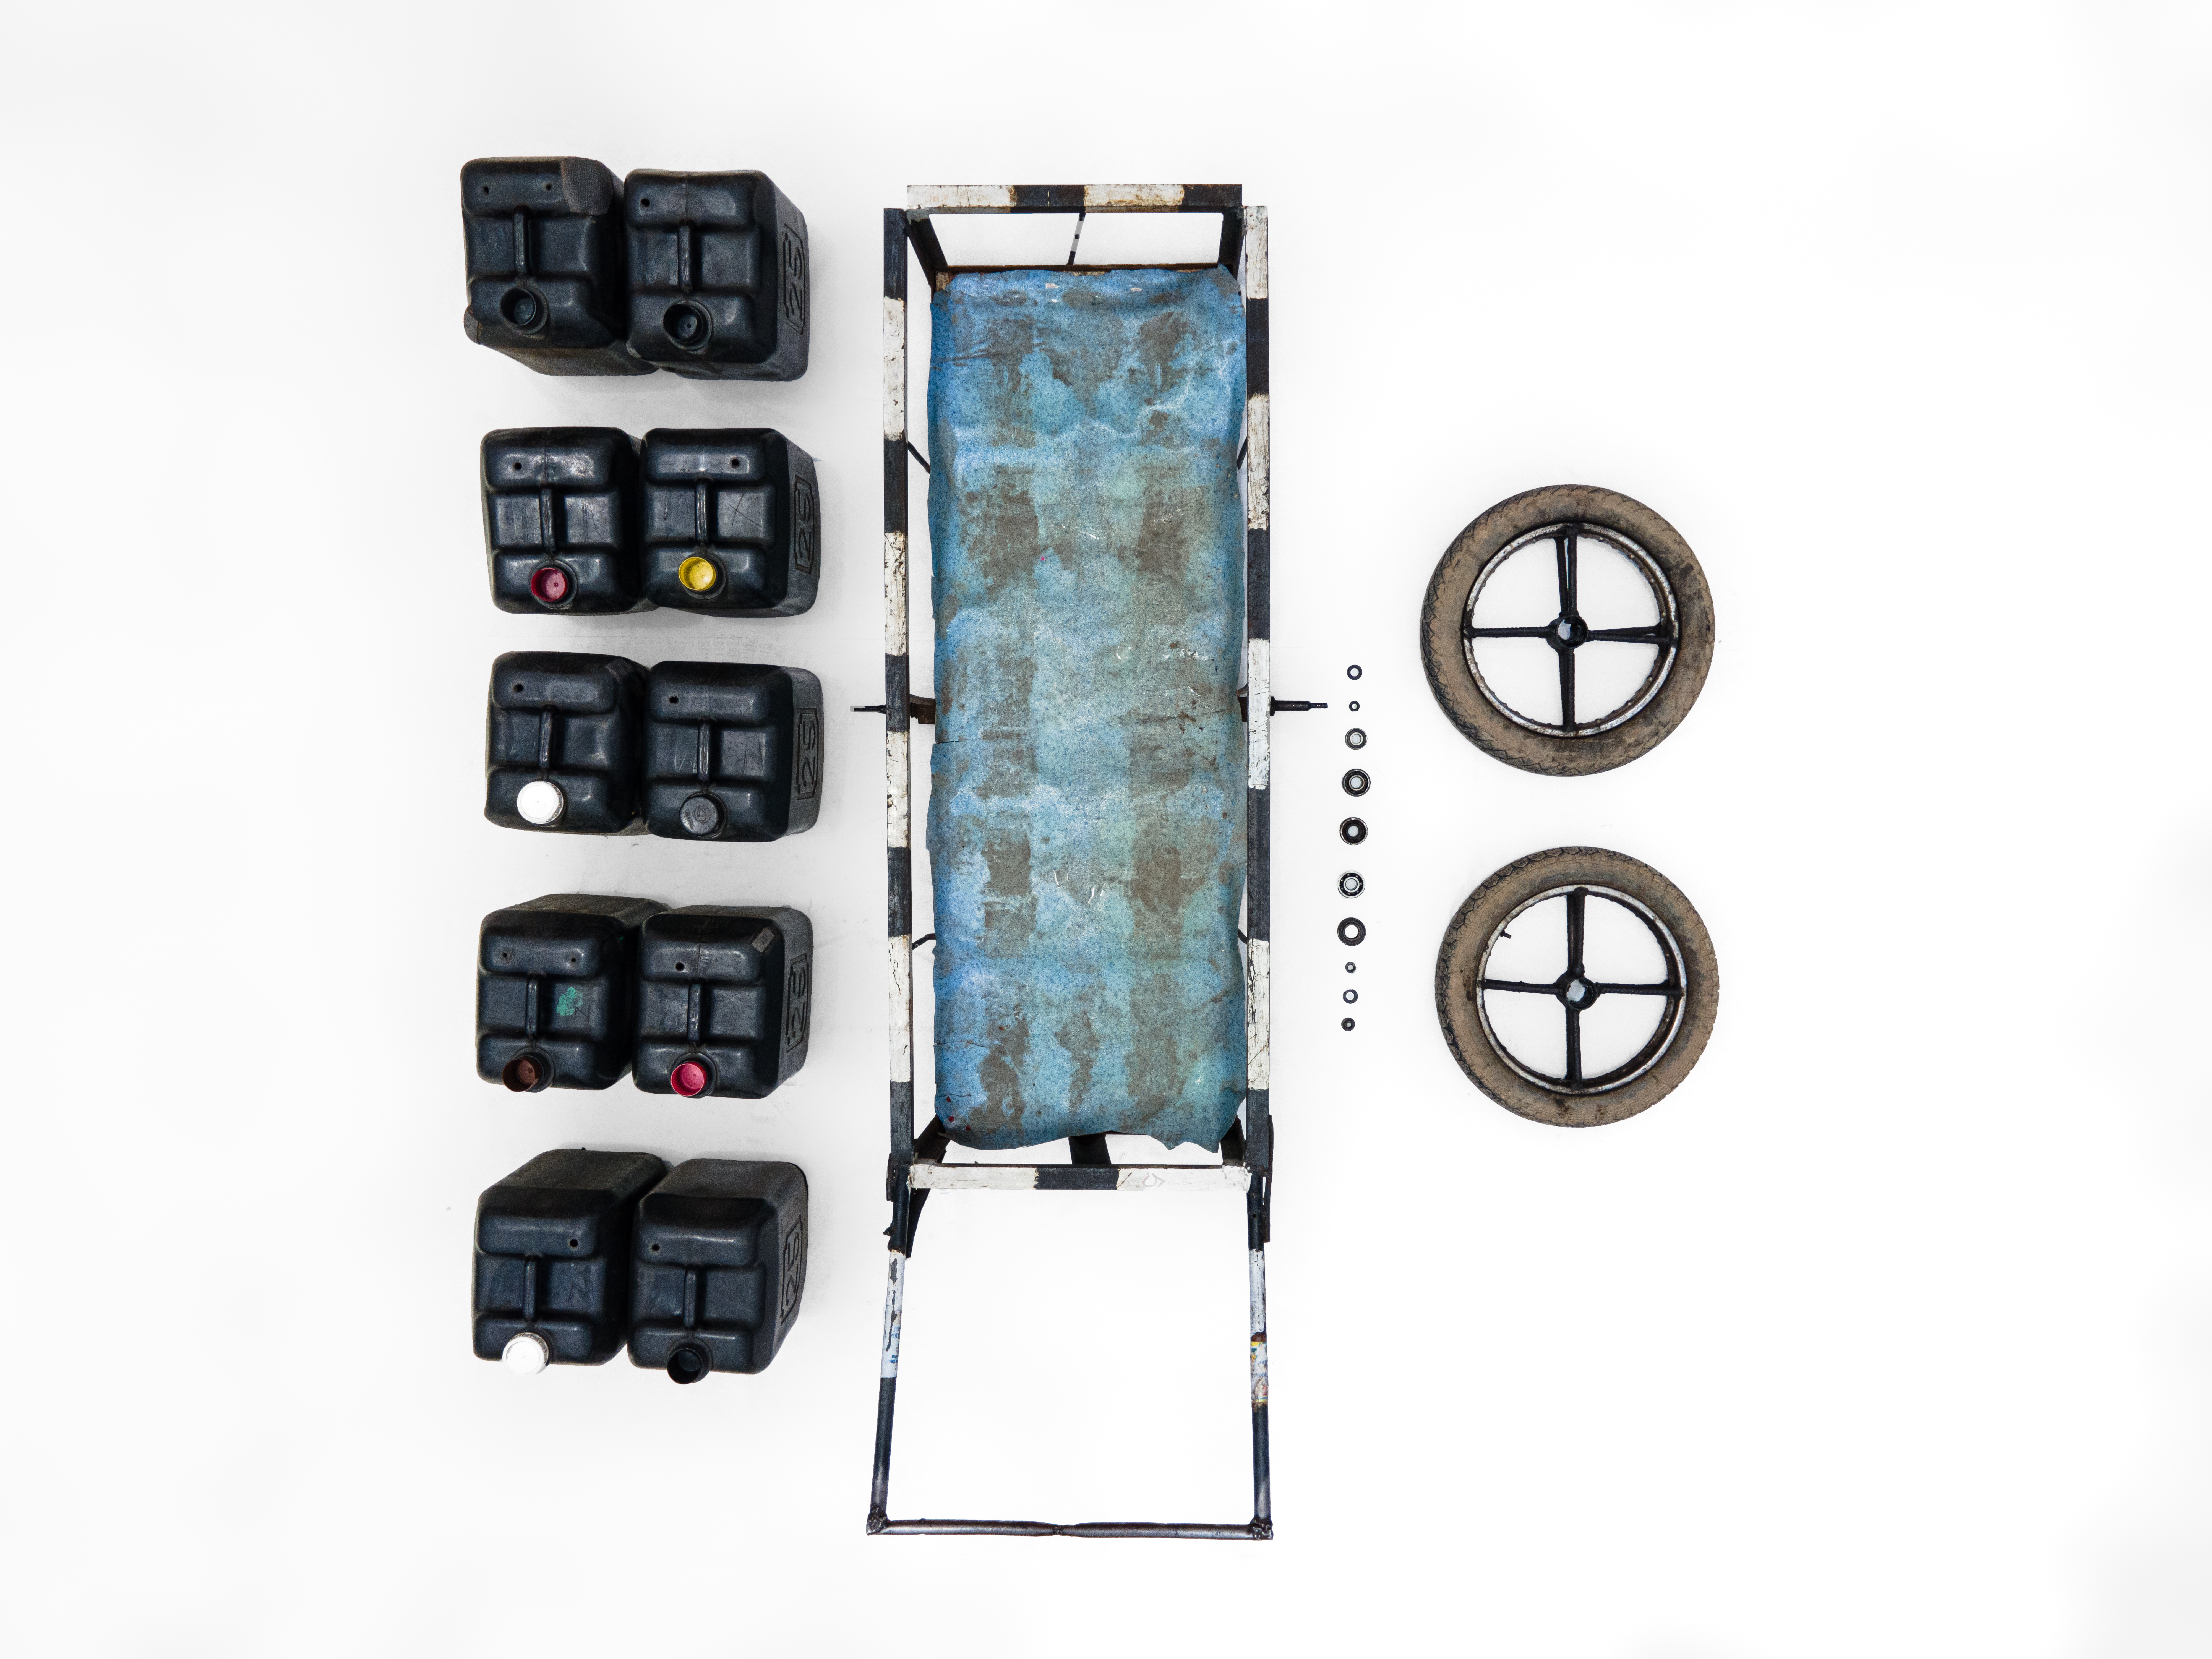 An aerial view of the contents of a meruwa water barrel. Five black jugs of water sit next to the blue trundle. Wheels and screws lay to the side